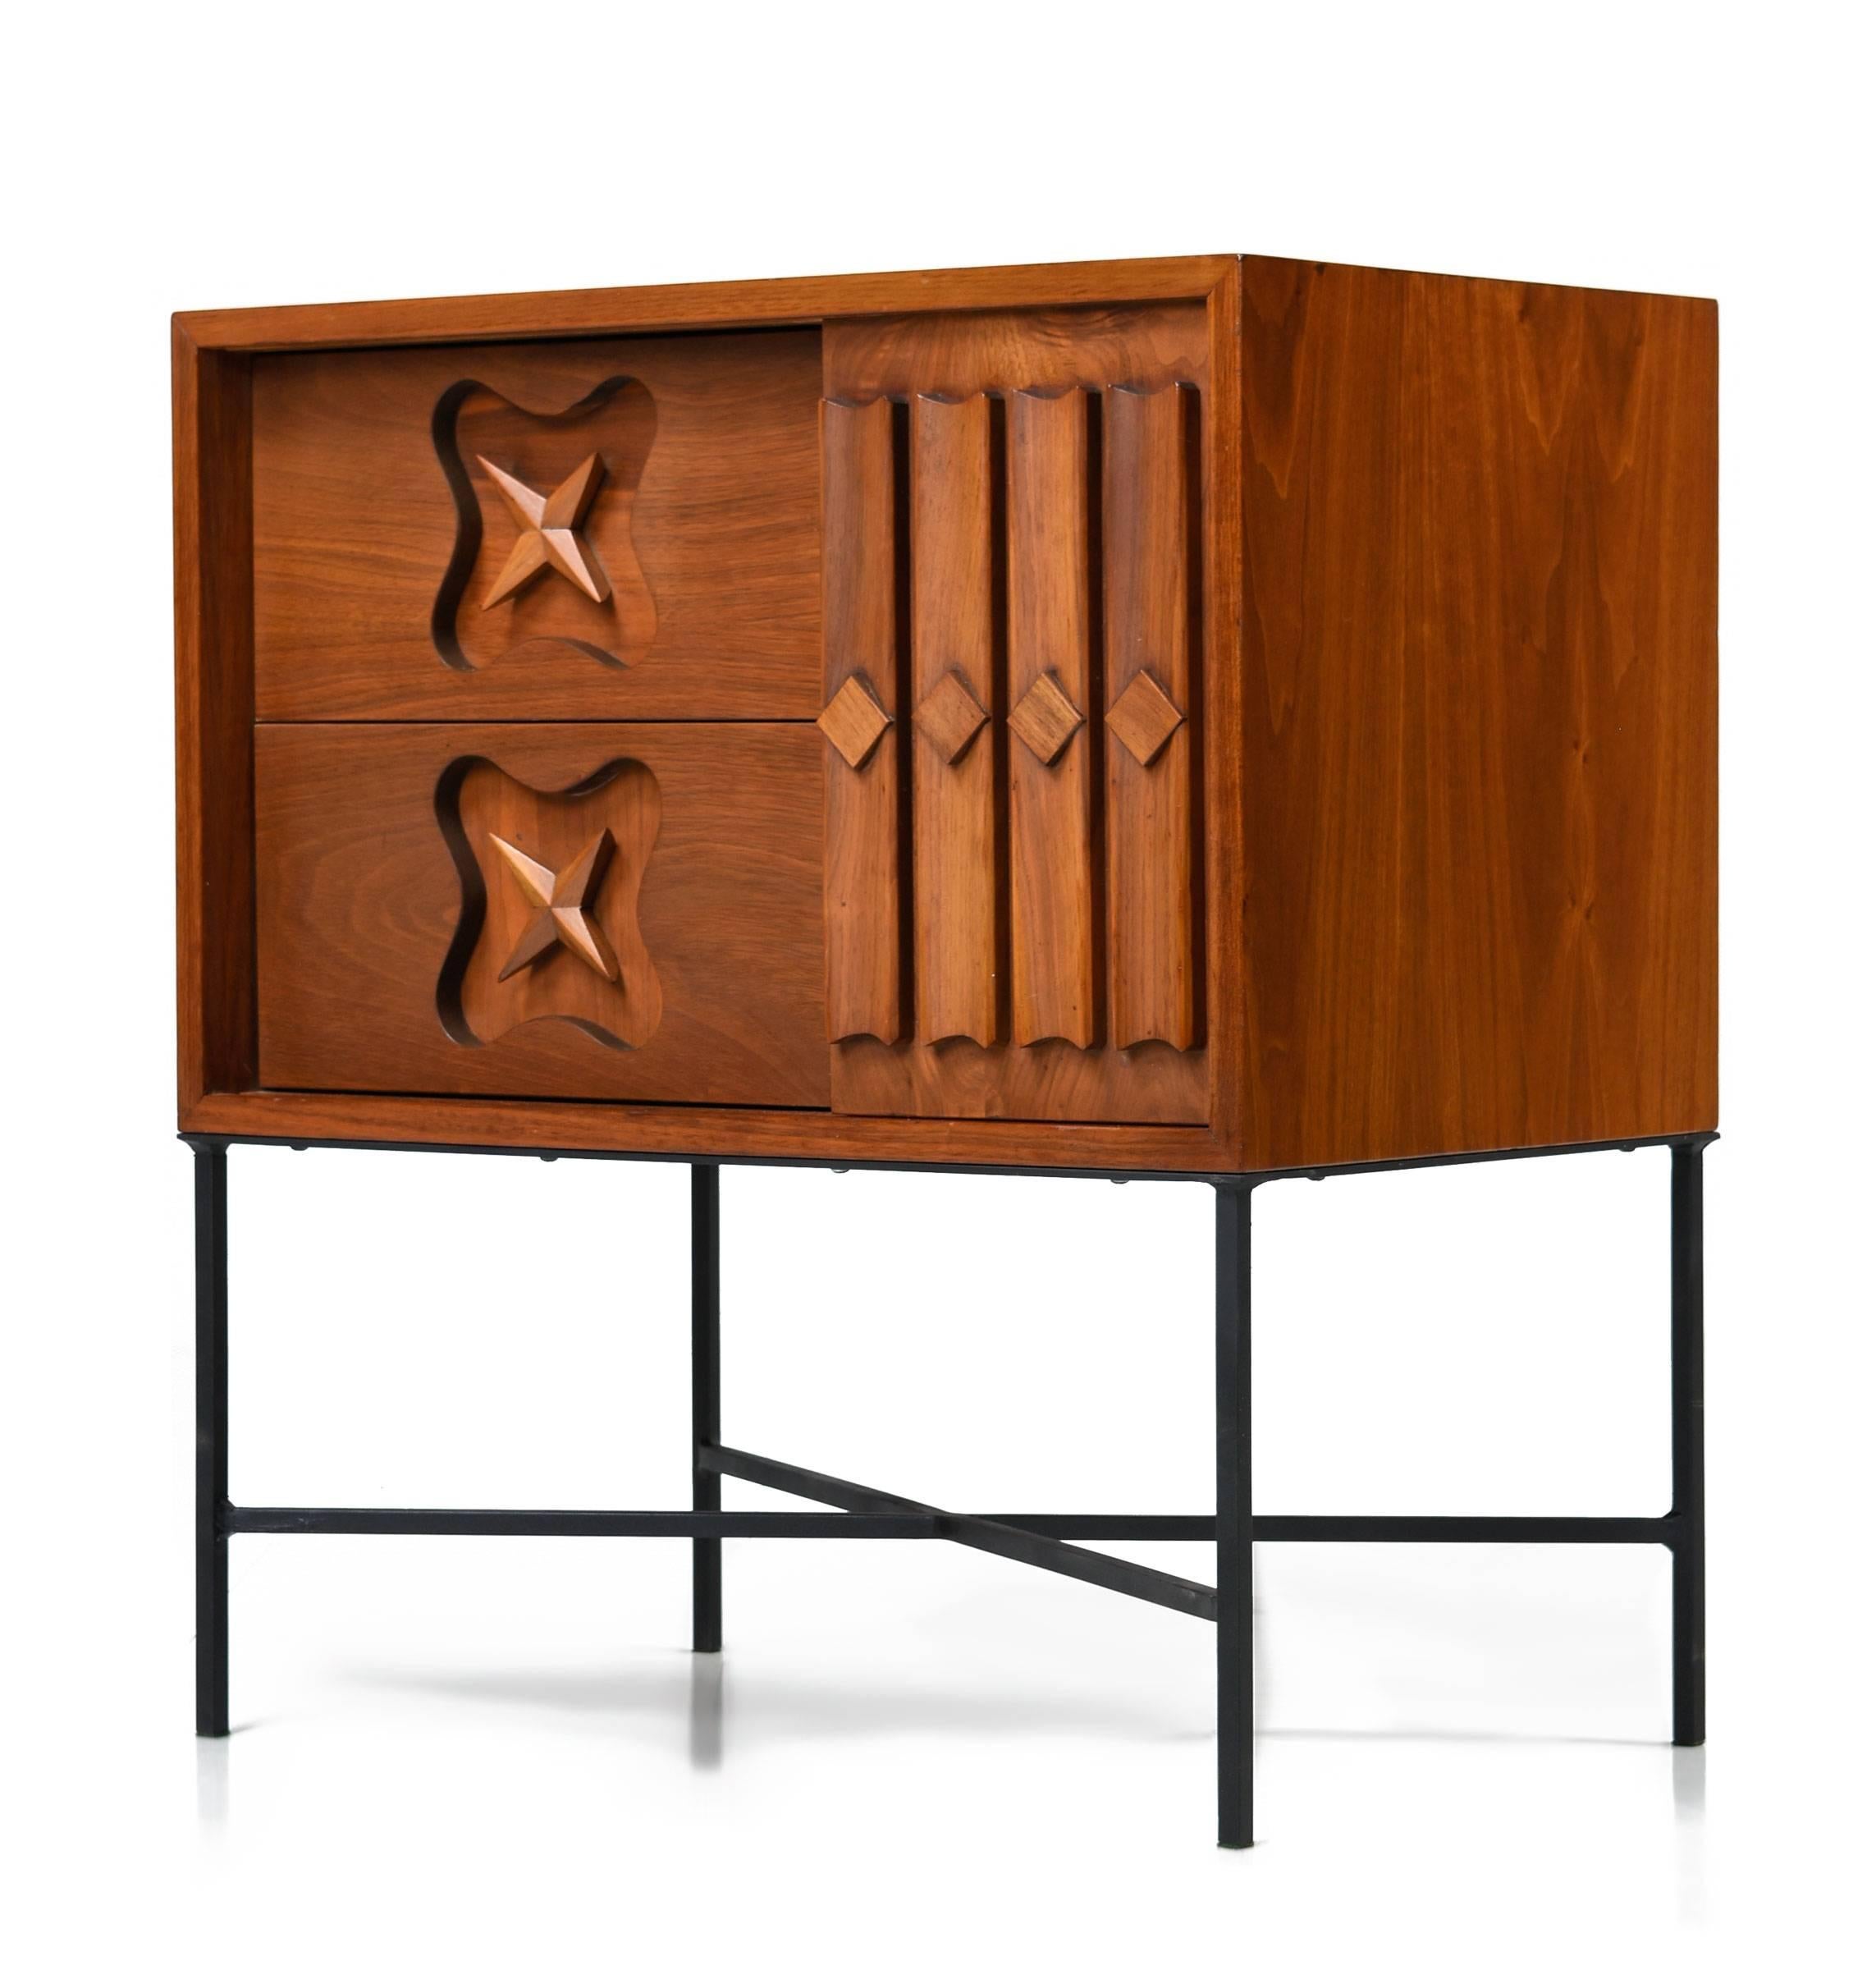 Pair of one-of-a-kind Mid-Century Modern nightstands with star accent and custom-made base. The original Mid-Century Modern walnut cabinets have been professionally refinished and mounted to custom-made, hand welded, steel bases. There aren't